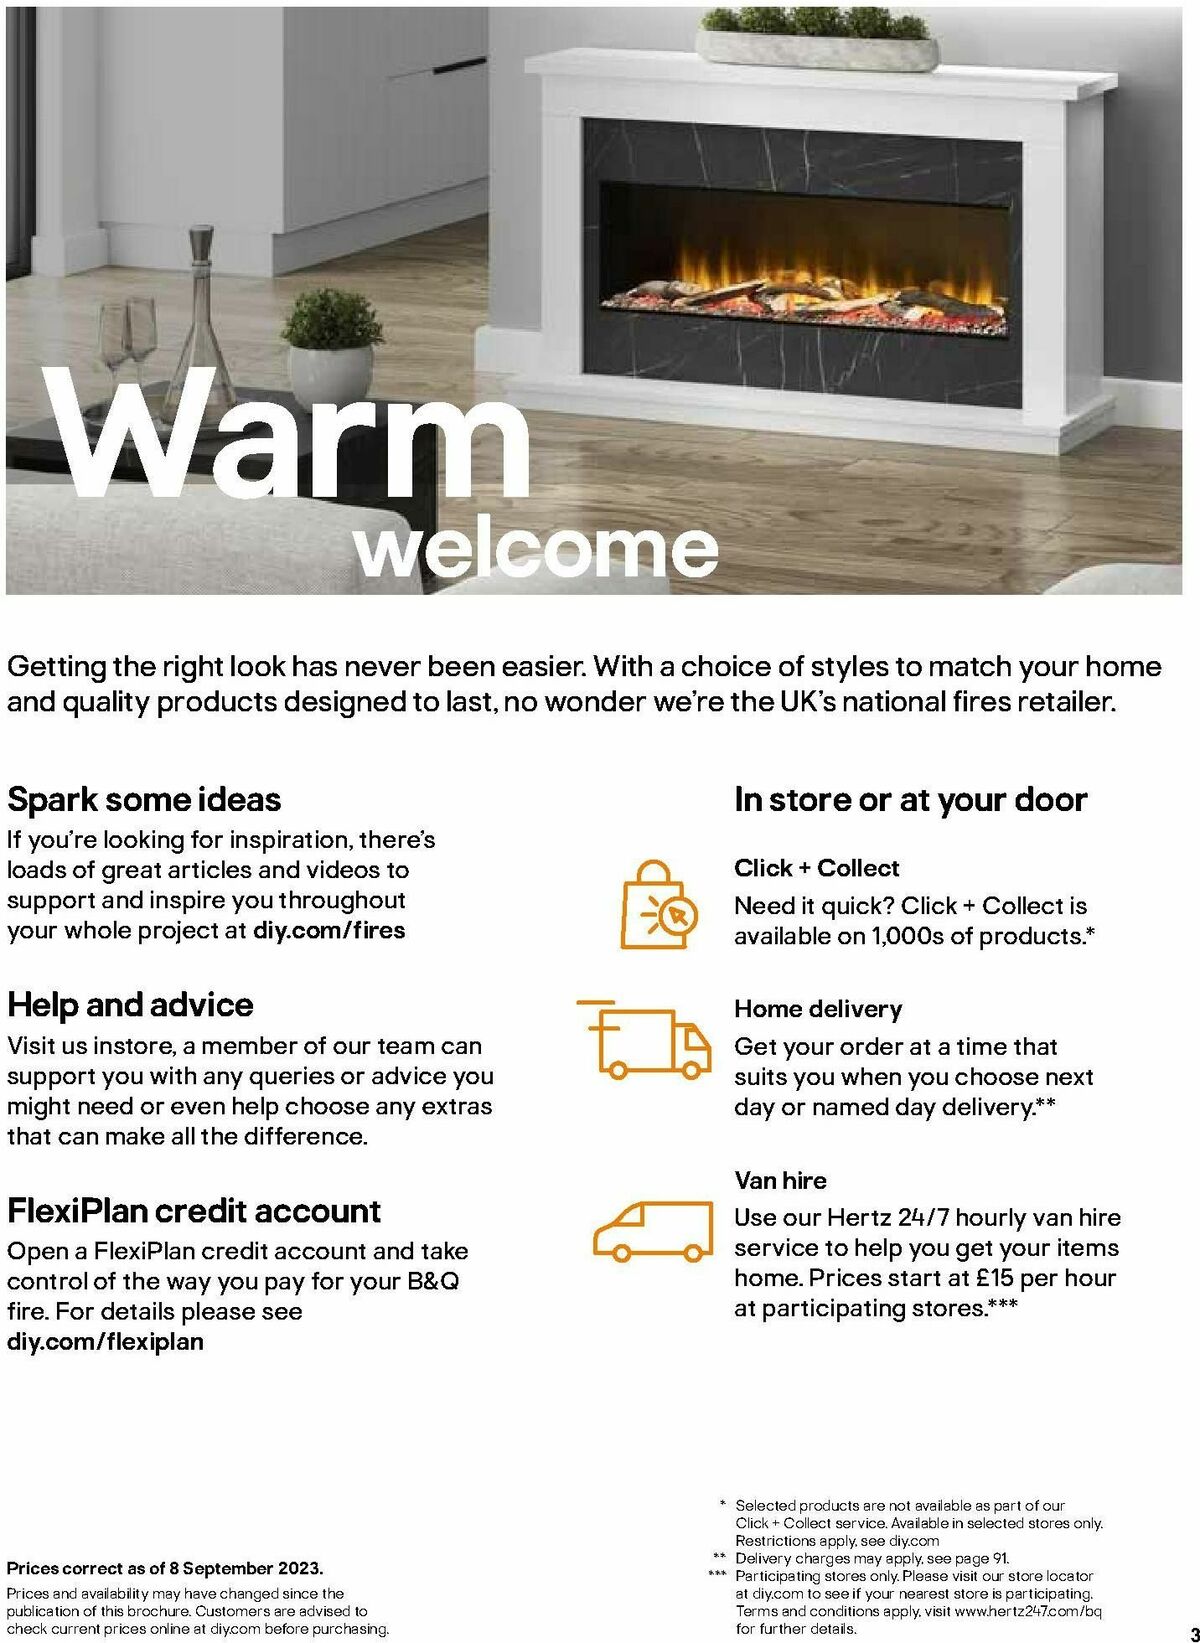 B&Q Fire Collections Offers from 15 October